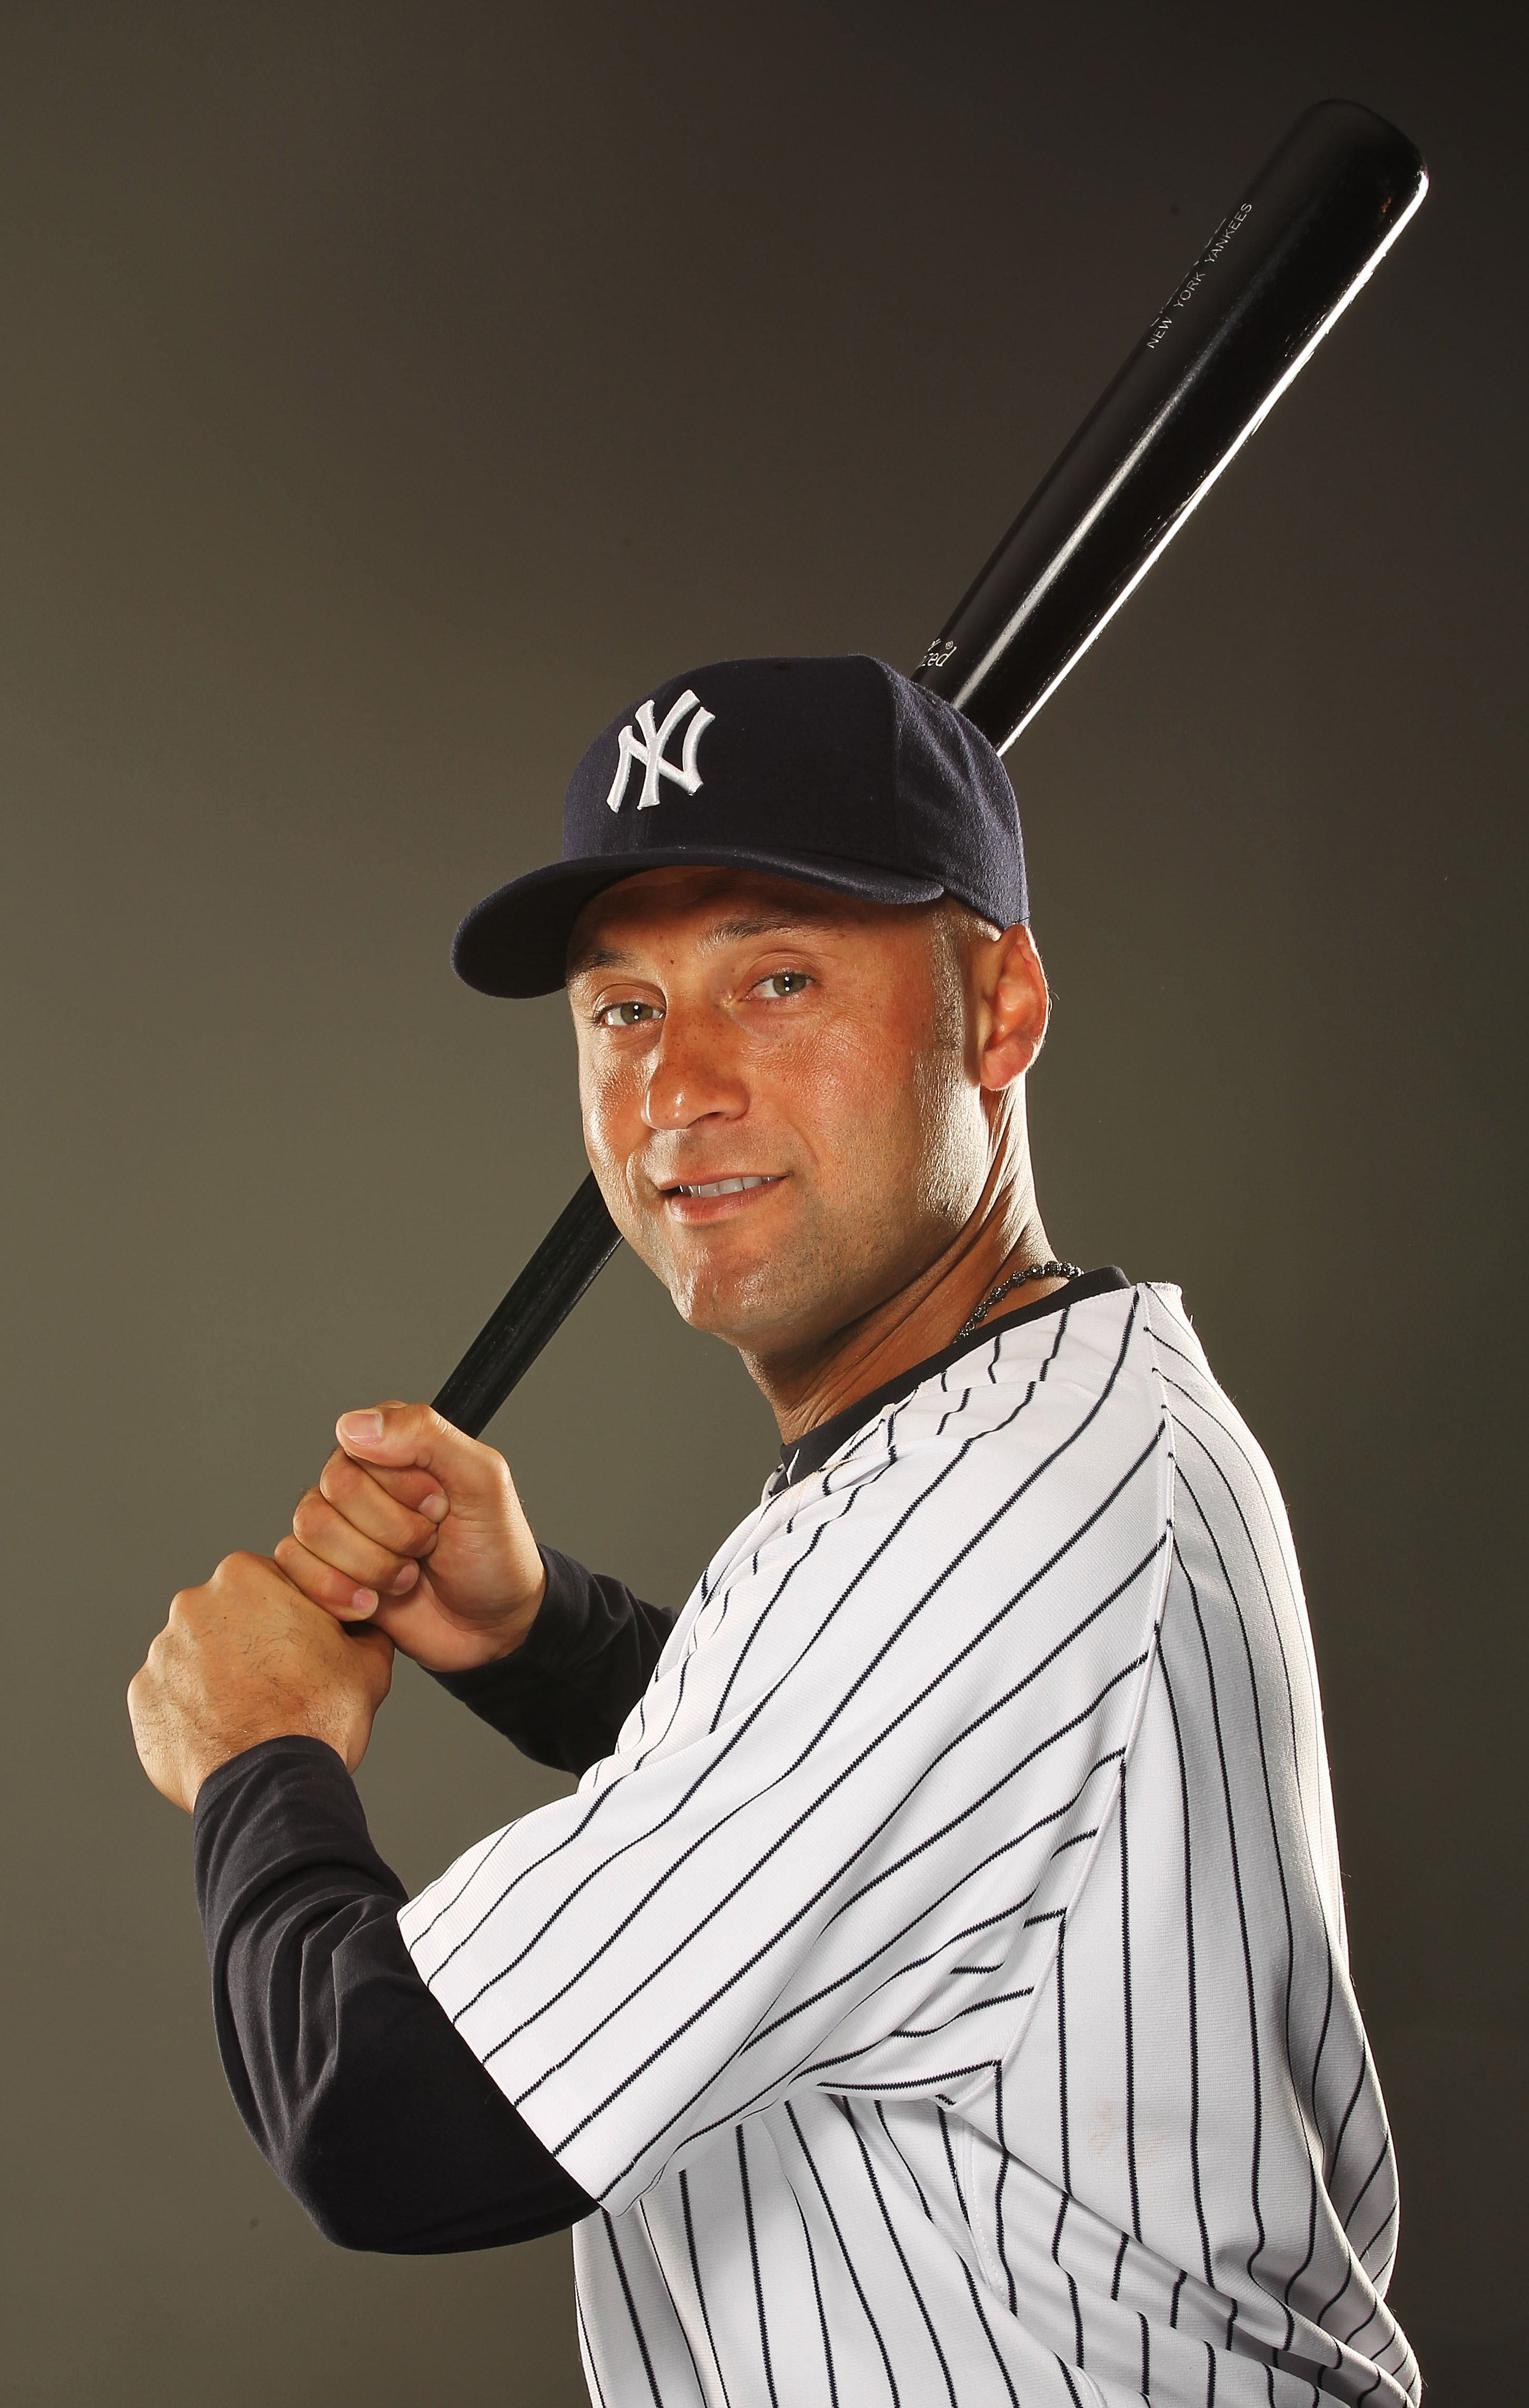 Jeter's retirement marks the end of an era for '90s superstars